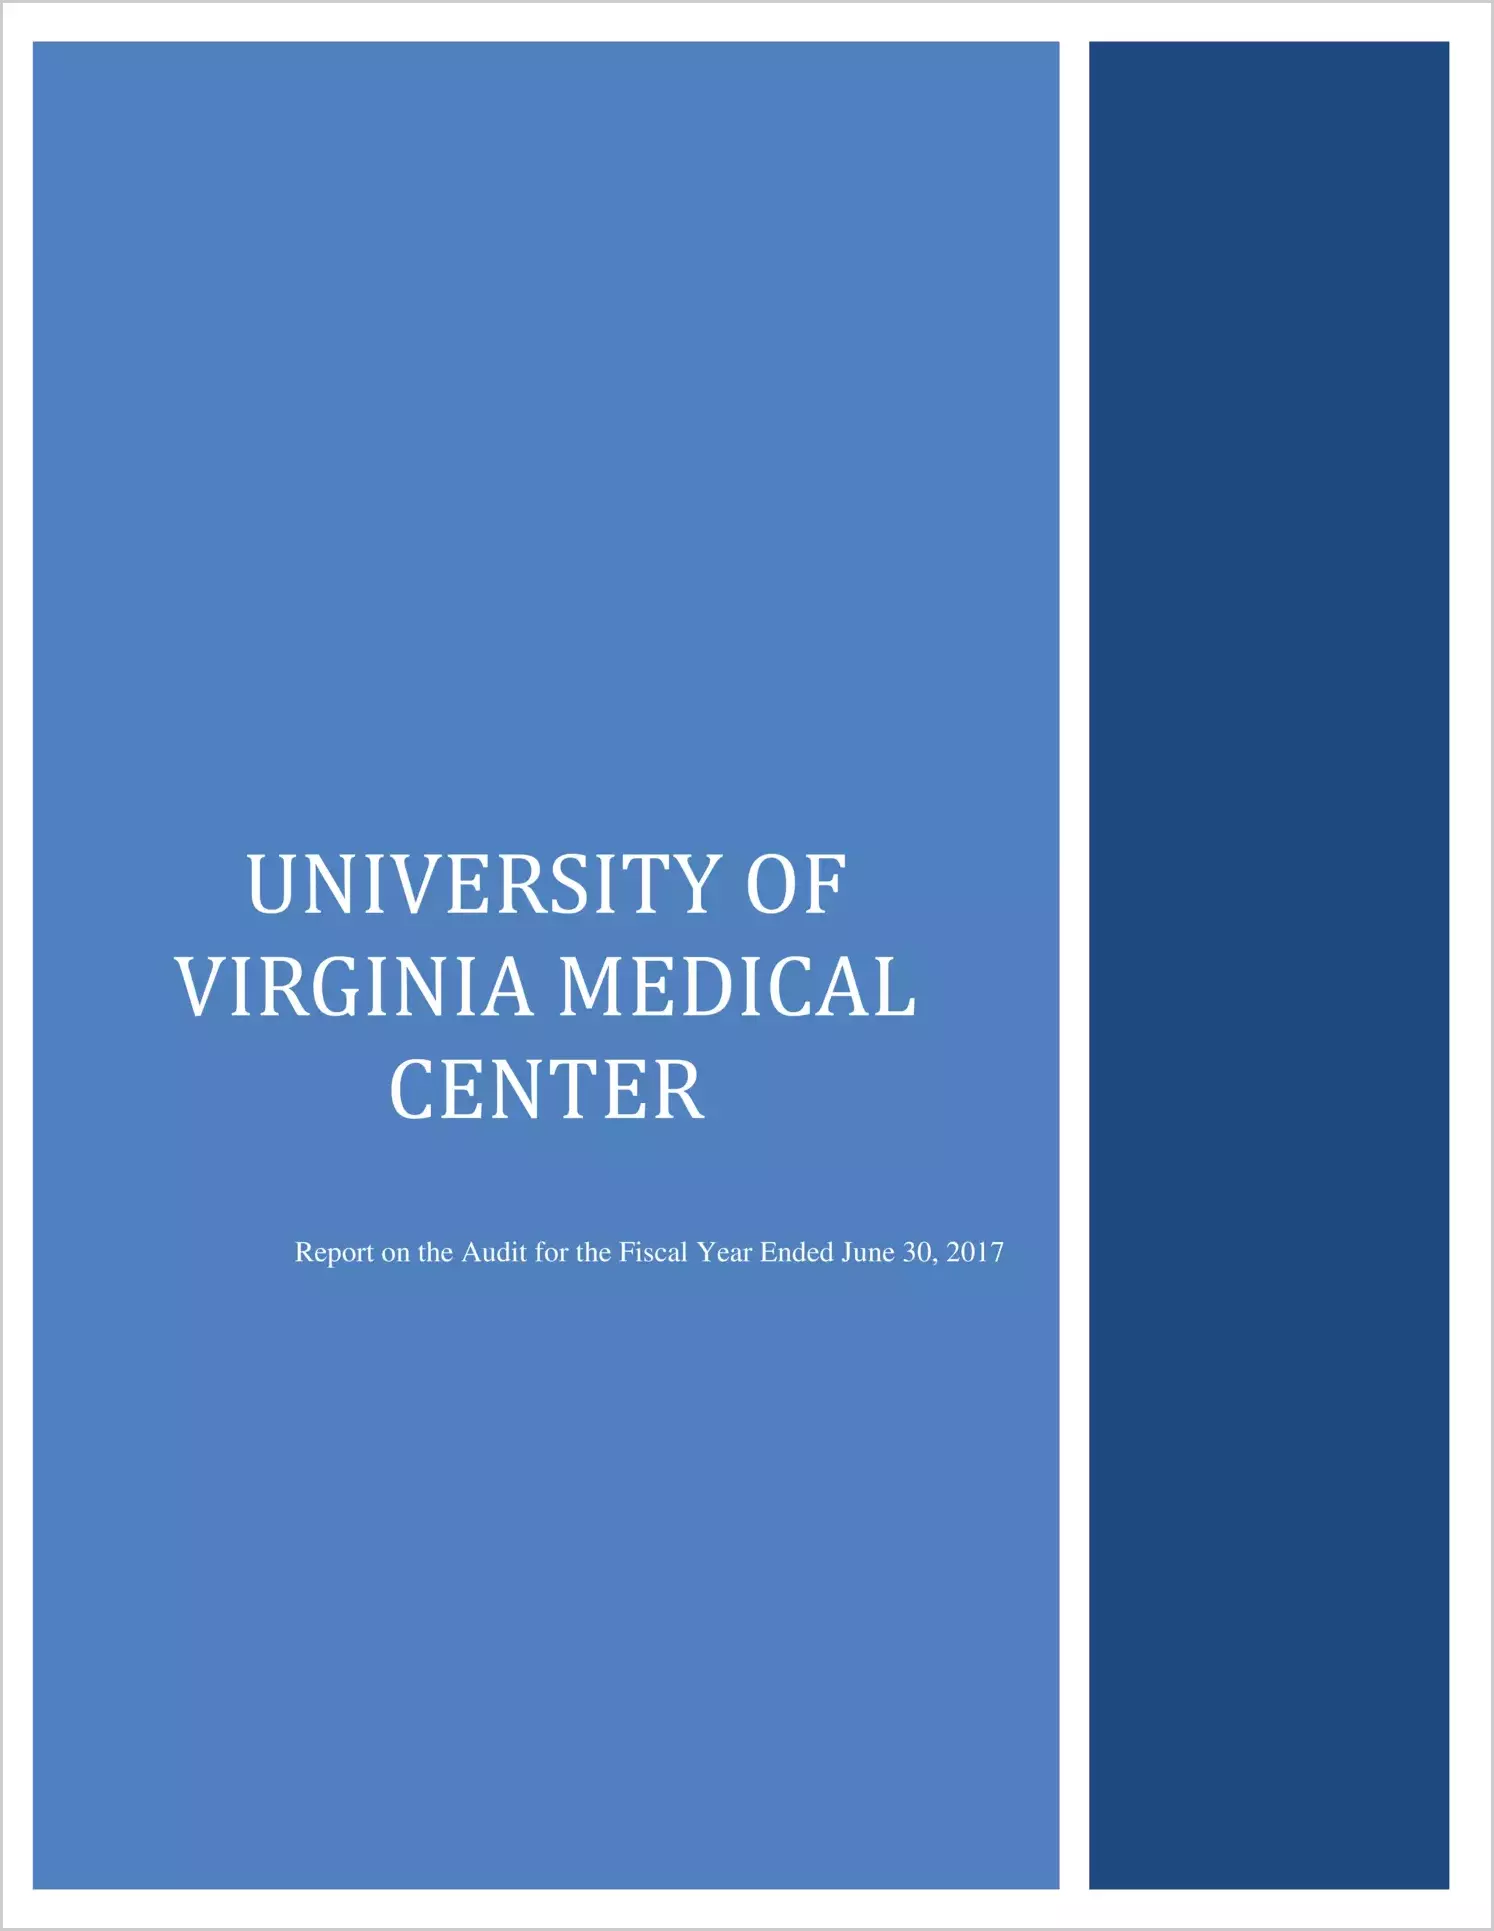 University of Virginia Medical Center Financial Statement for the year ended June 30, 2017